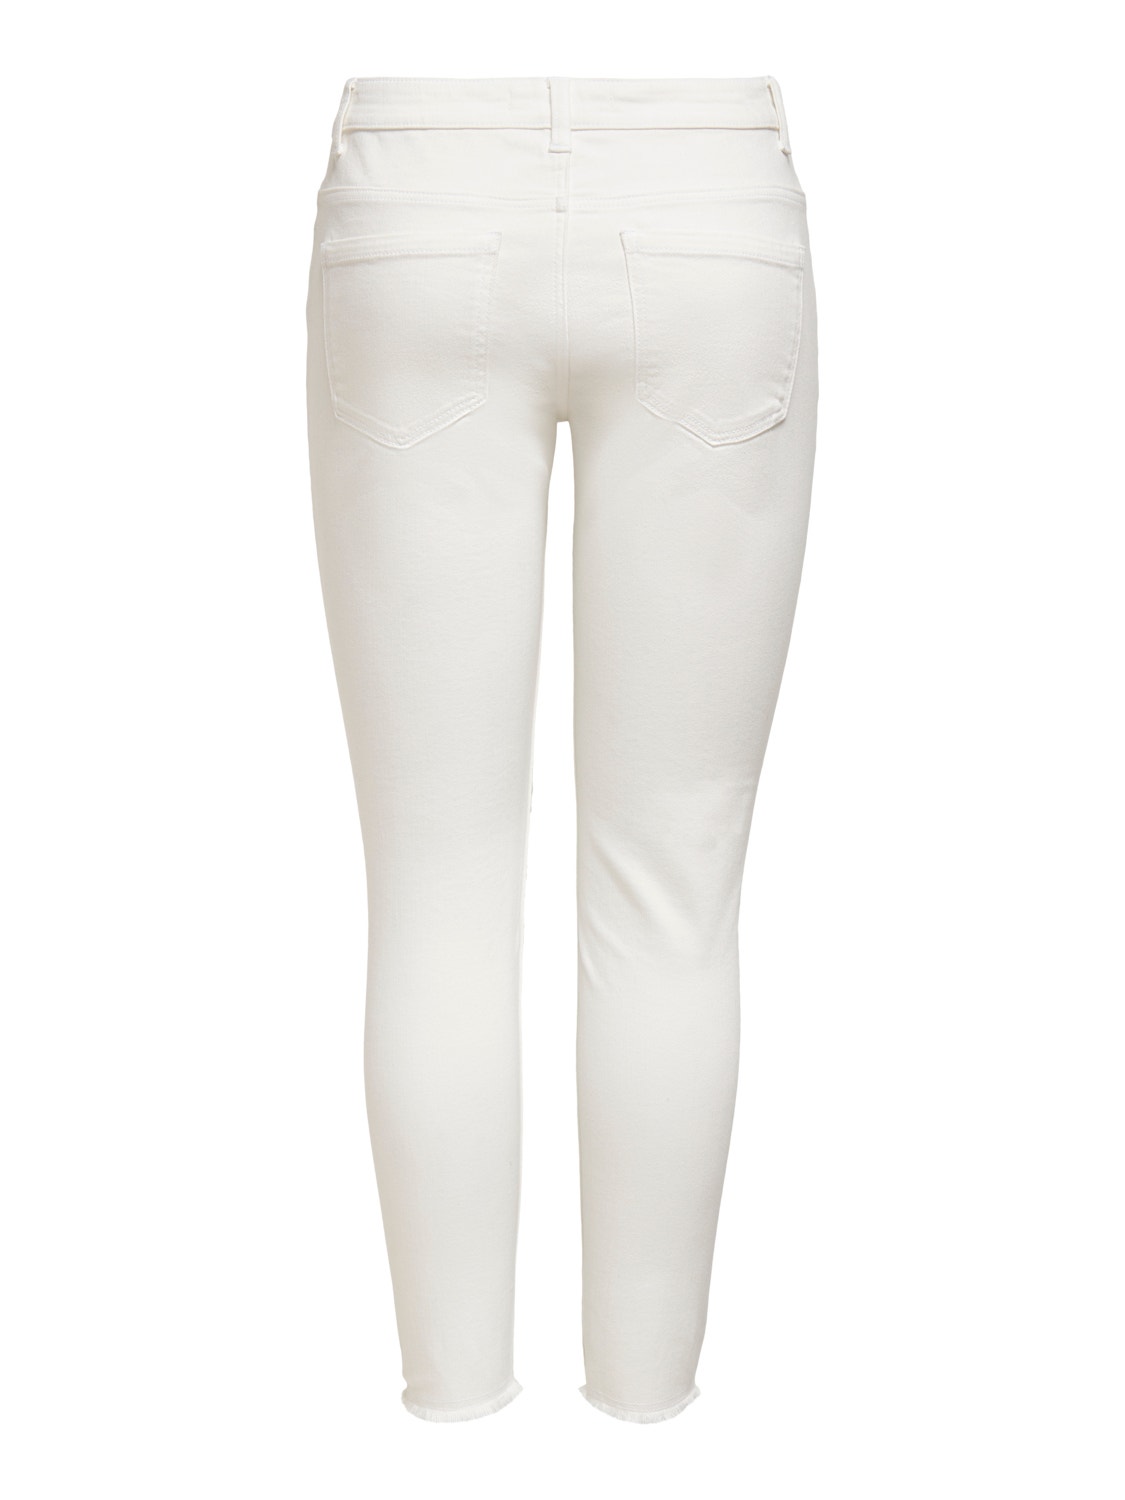 ONLY Tall JDYSonja white ankle Skinny jeans -White - 15258134